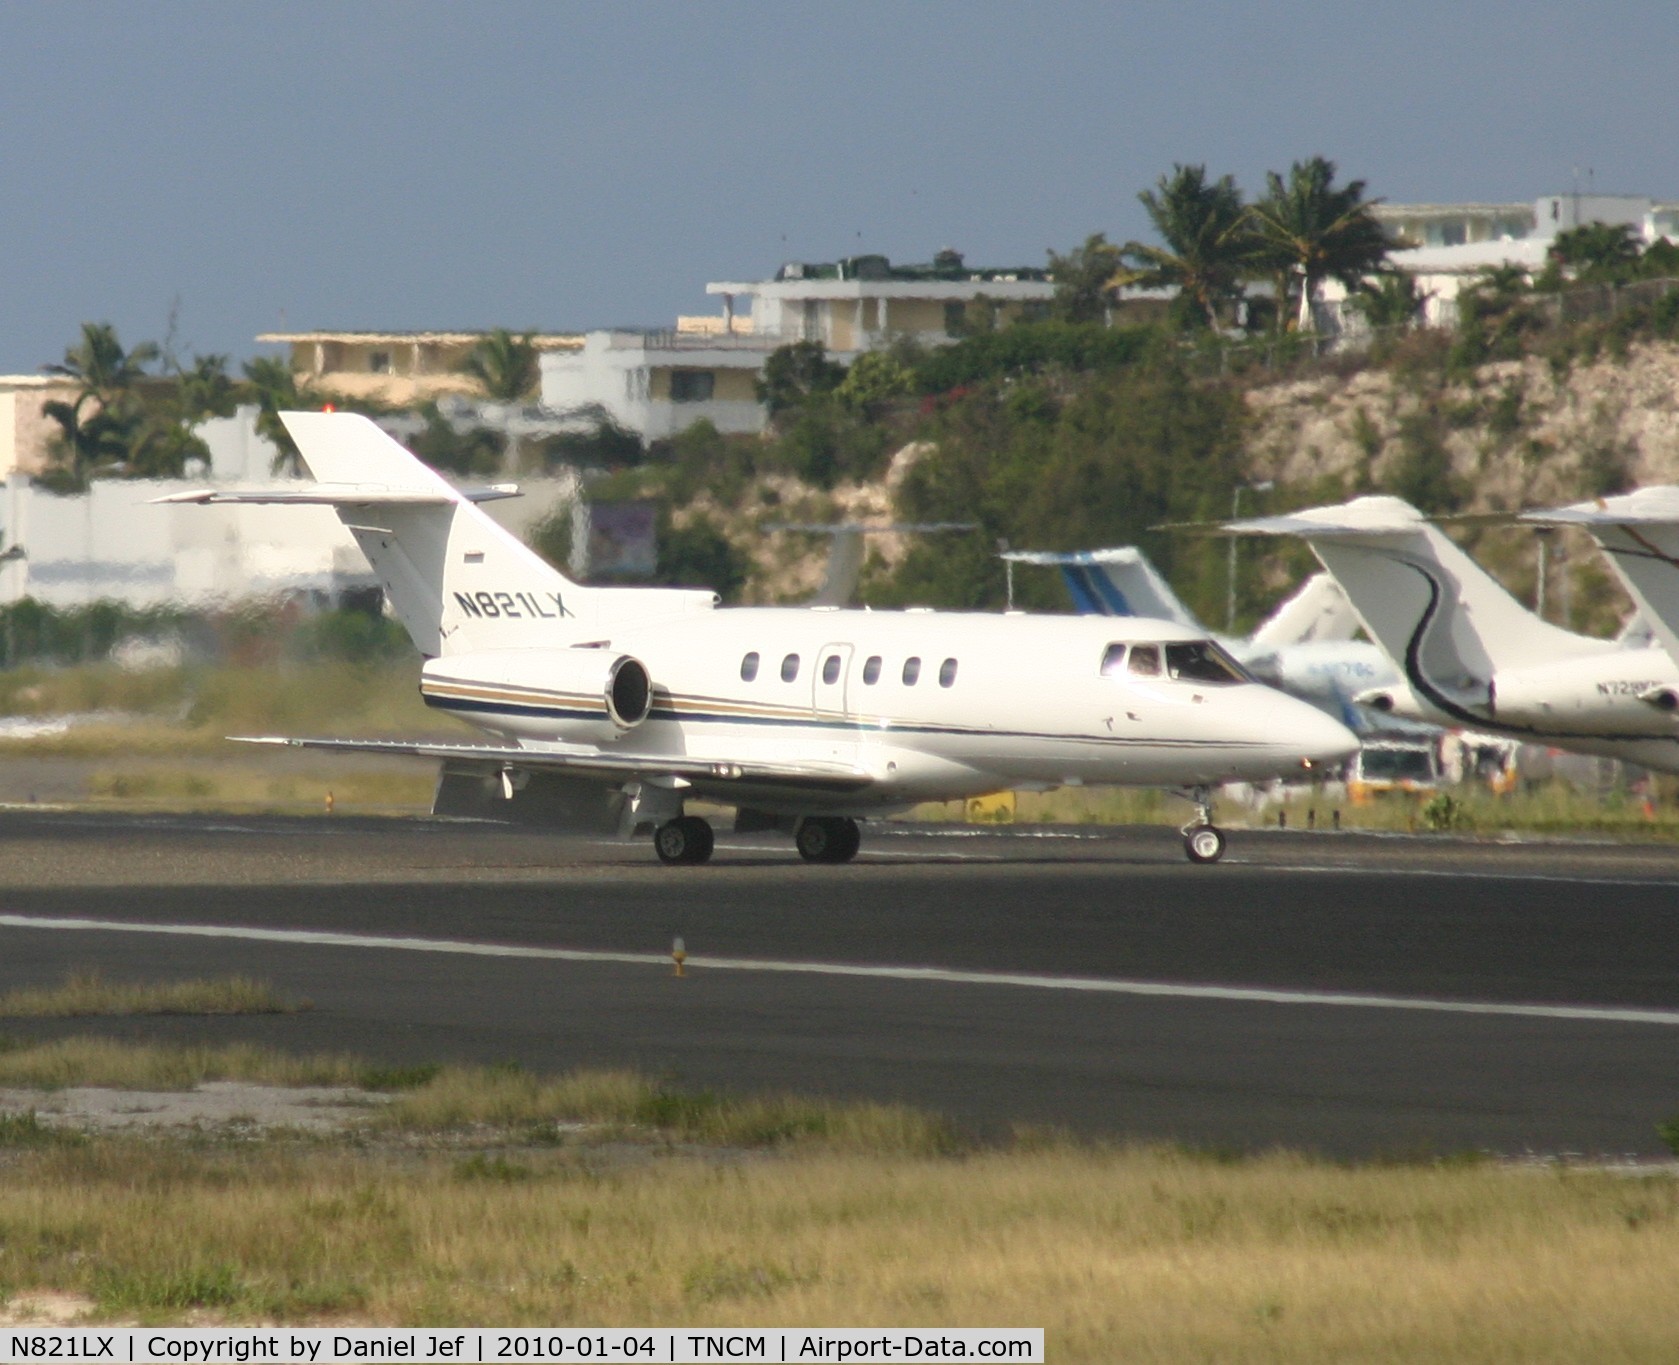 N821LX, 1999 Raytheon Hawker 800XP C/N 258406, N821LX Just landed and taxing of the active